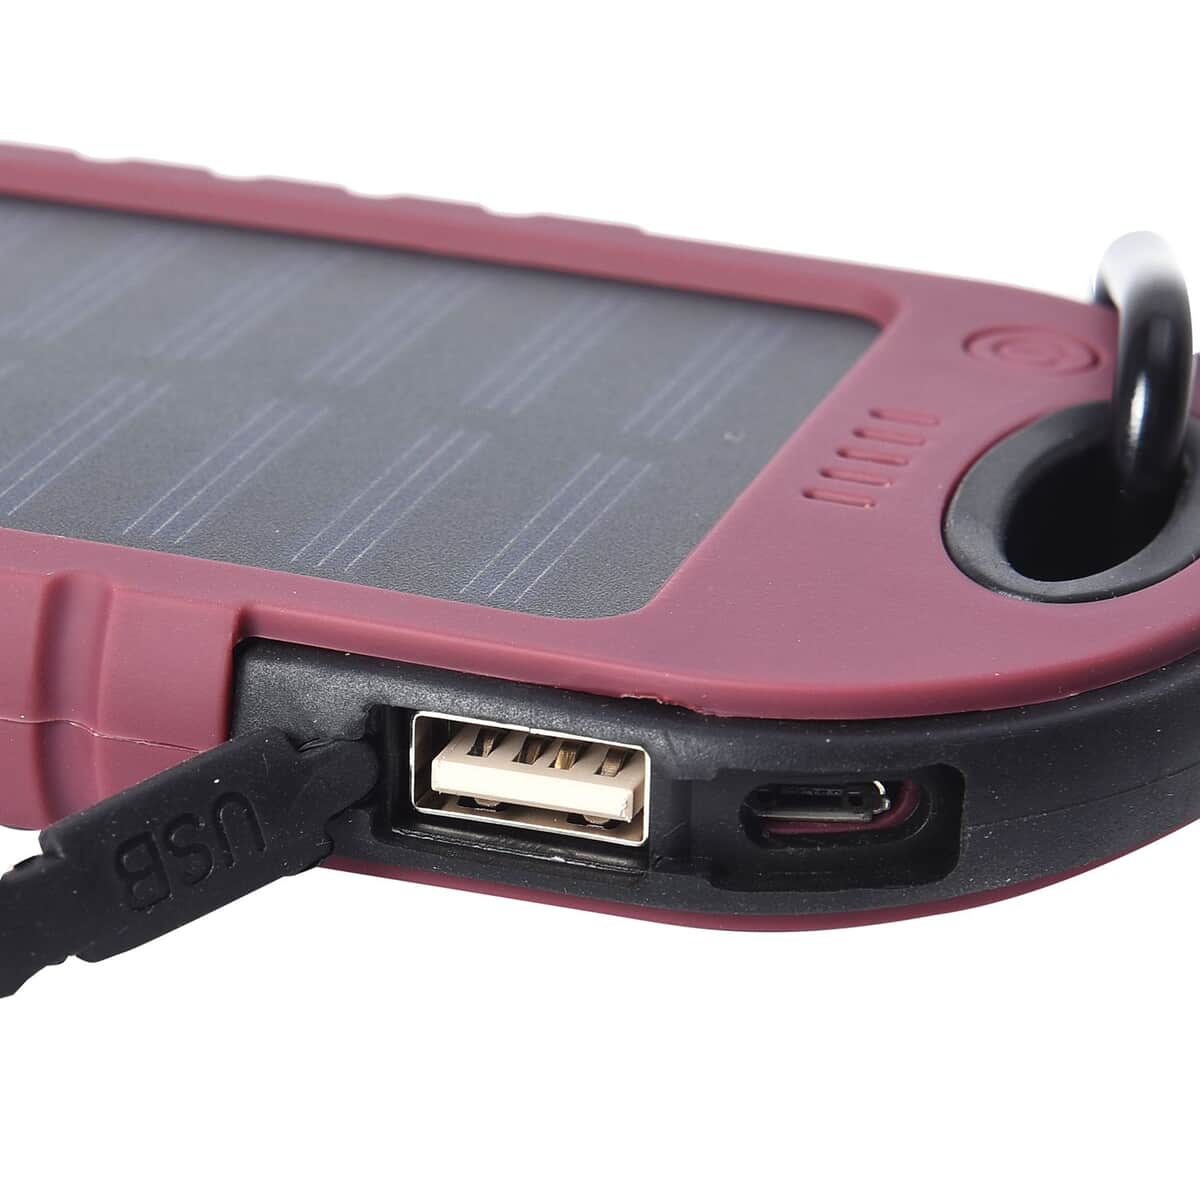 Homesmart Burgundy Carabiner Solar 5000 mAh Battery Charger with USB & Emergency LED Torch image number 5